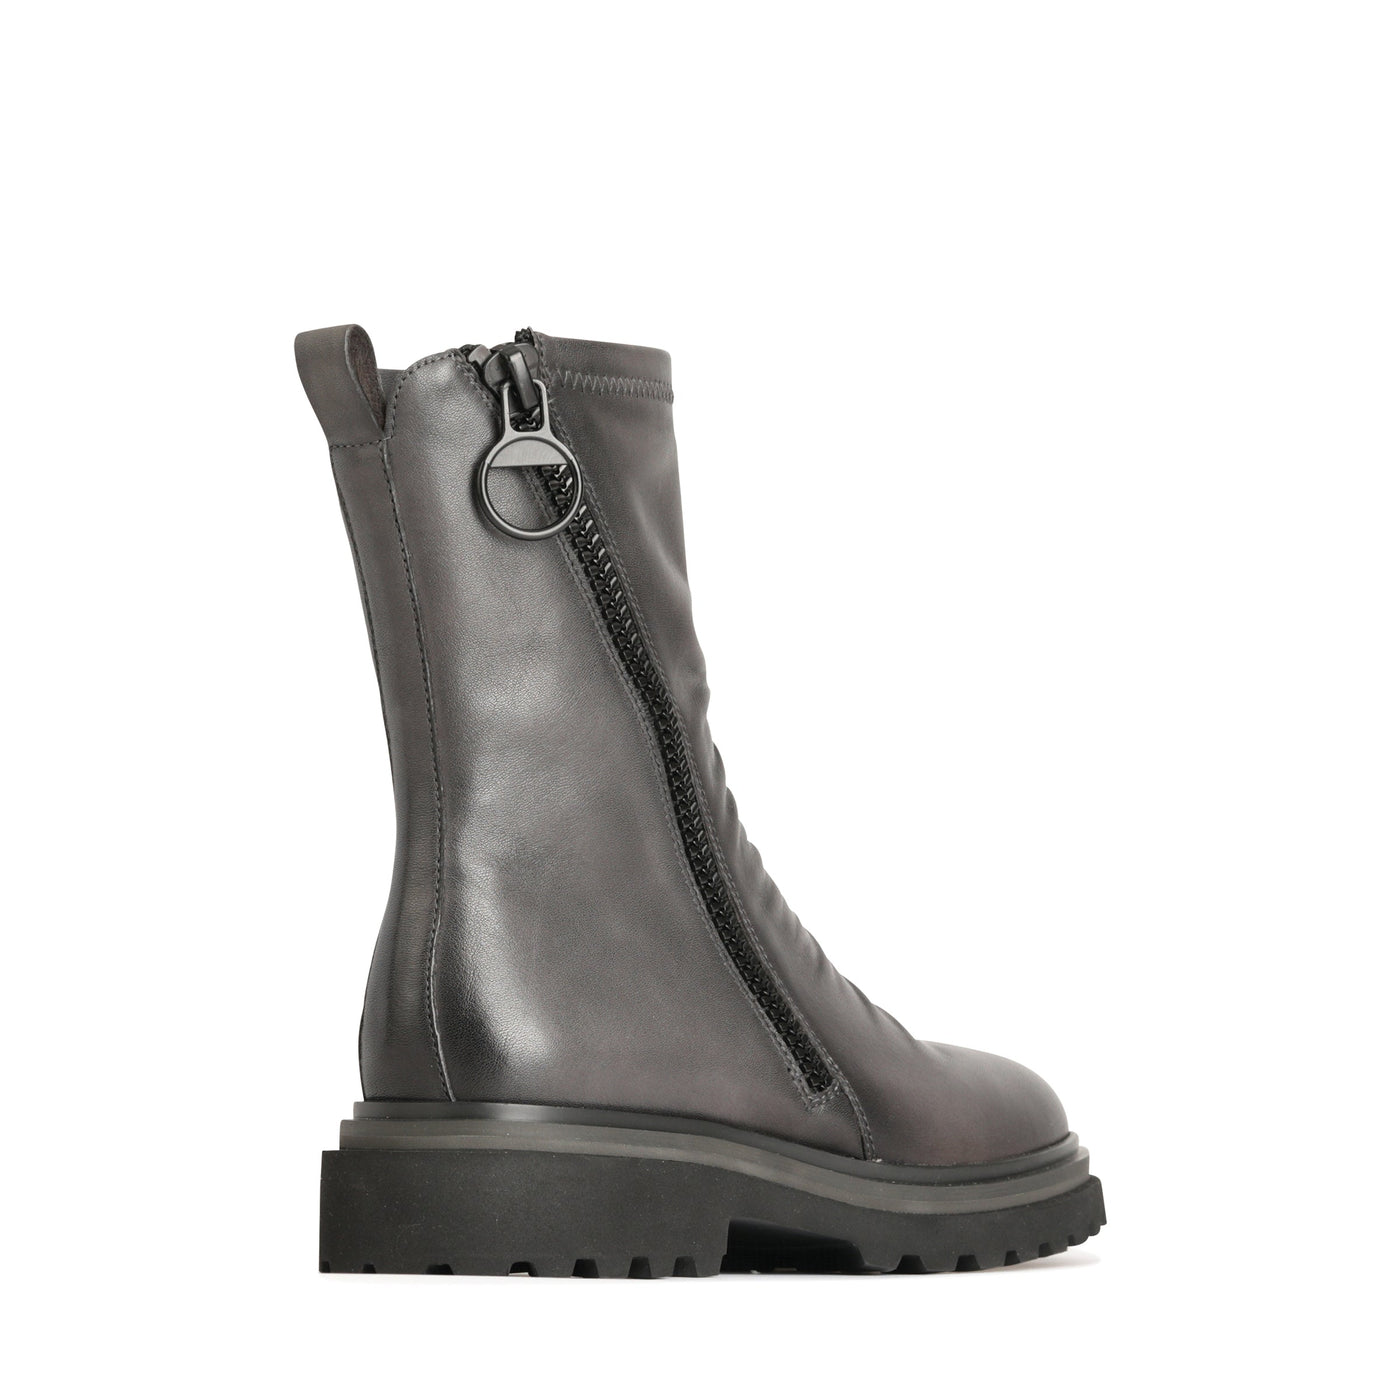 EOS SKARLET IRON - Women Boots - Collective Shoes 